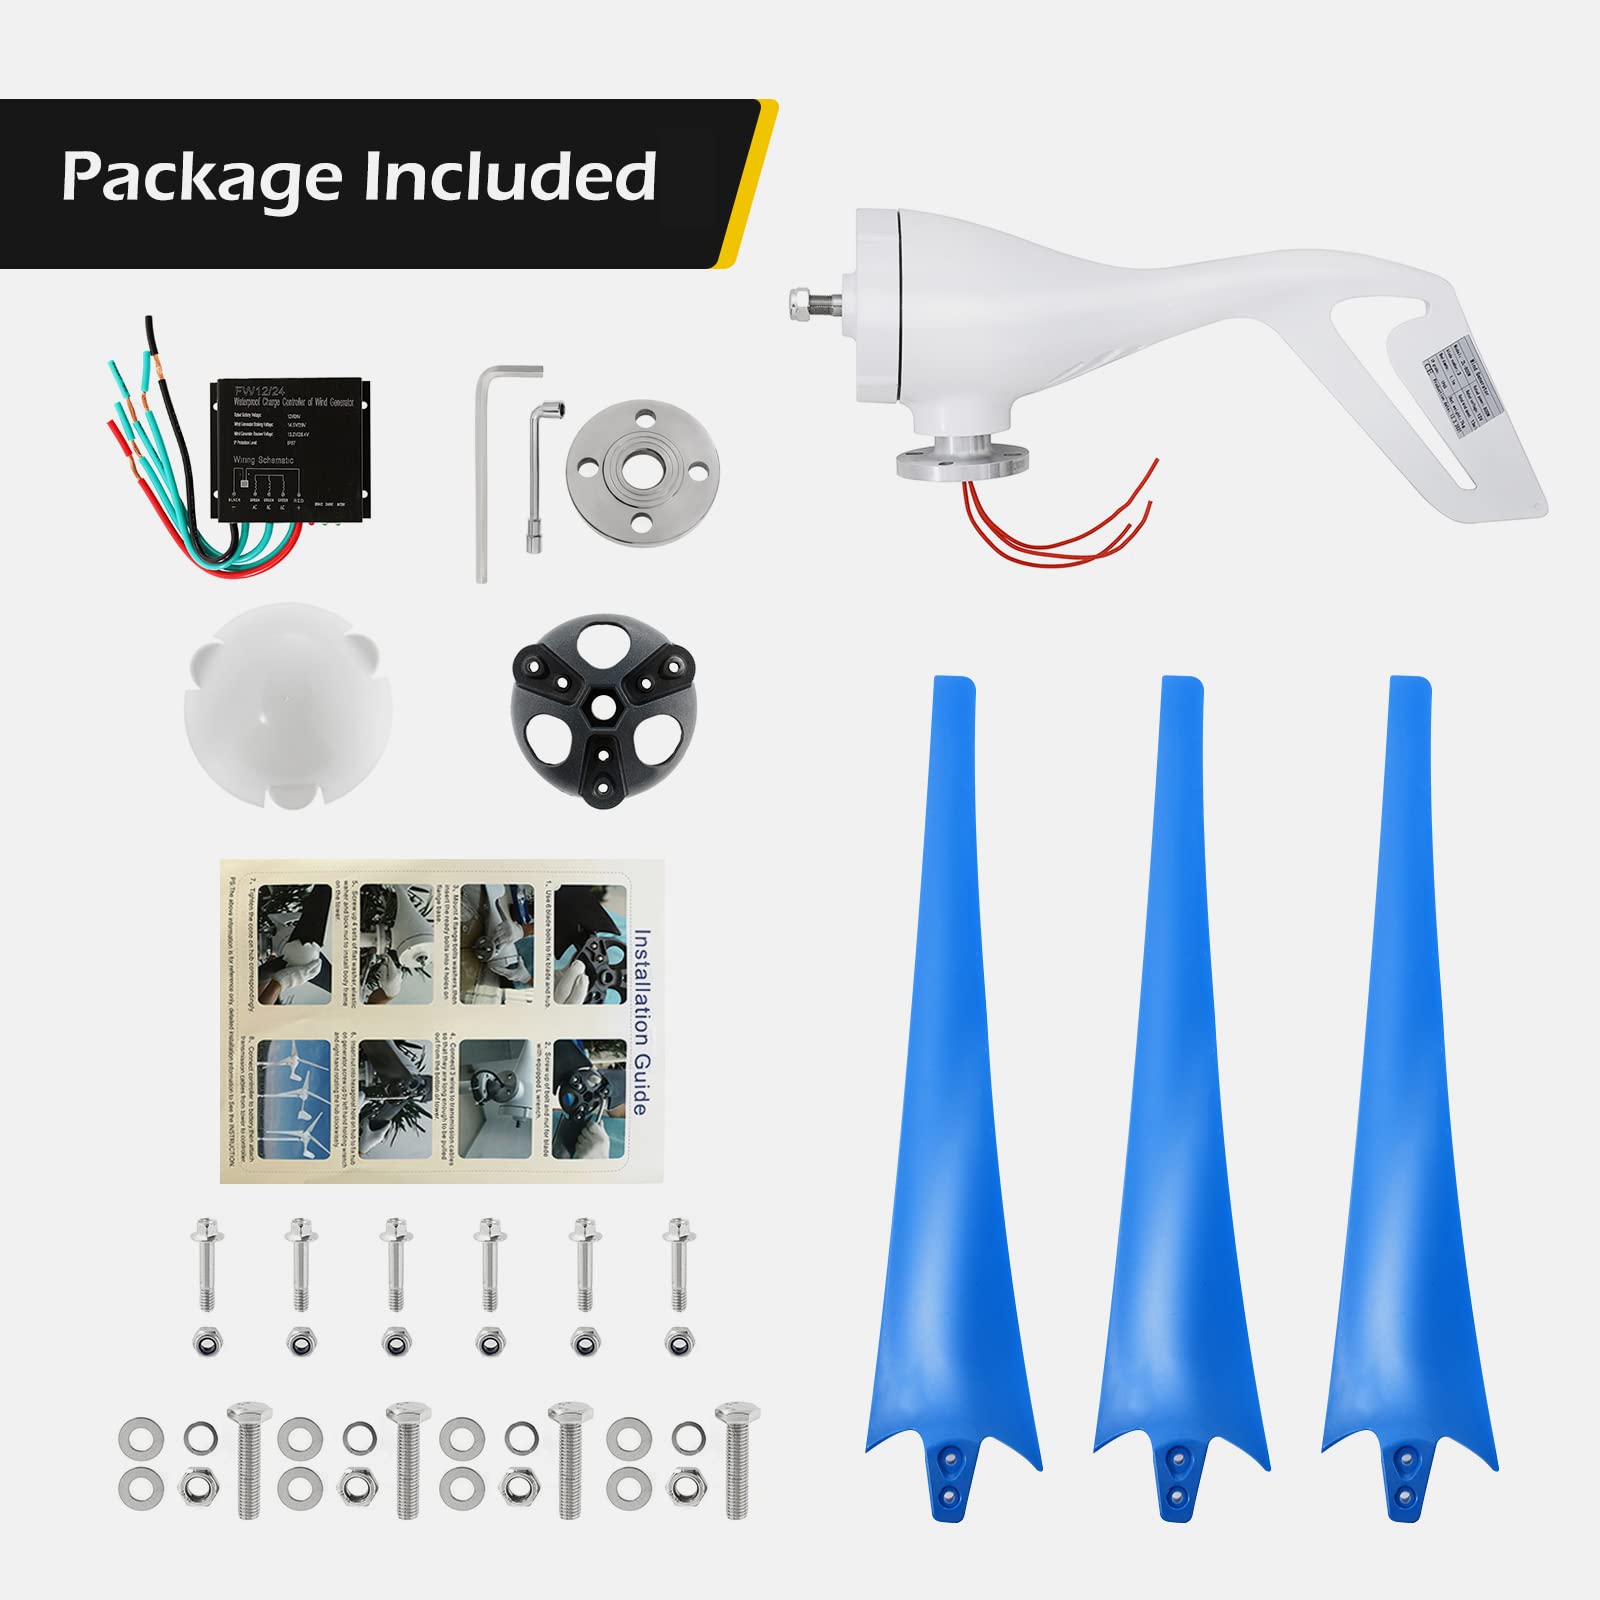 Dyna-Living Wind Turbine 12V 800W Wind Turbine Generator Kit 3 Blades Wind Turbines Motor with Charge Controller Power Generation Windmill for Home (Not Included Mast)